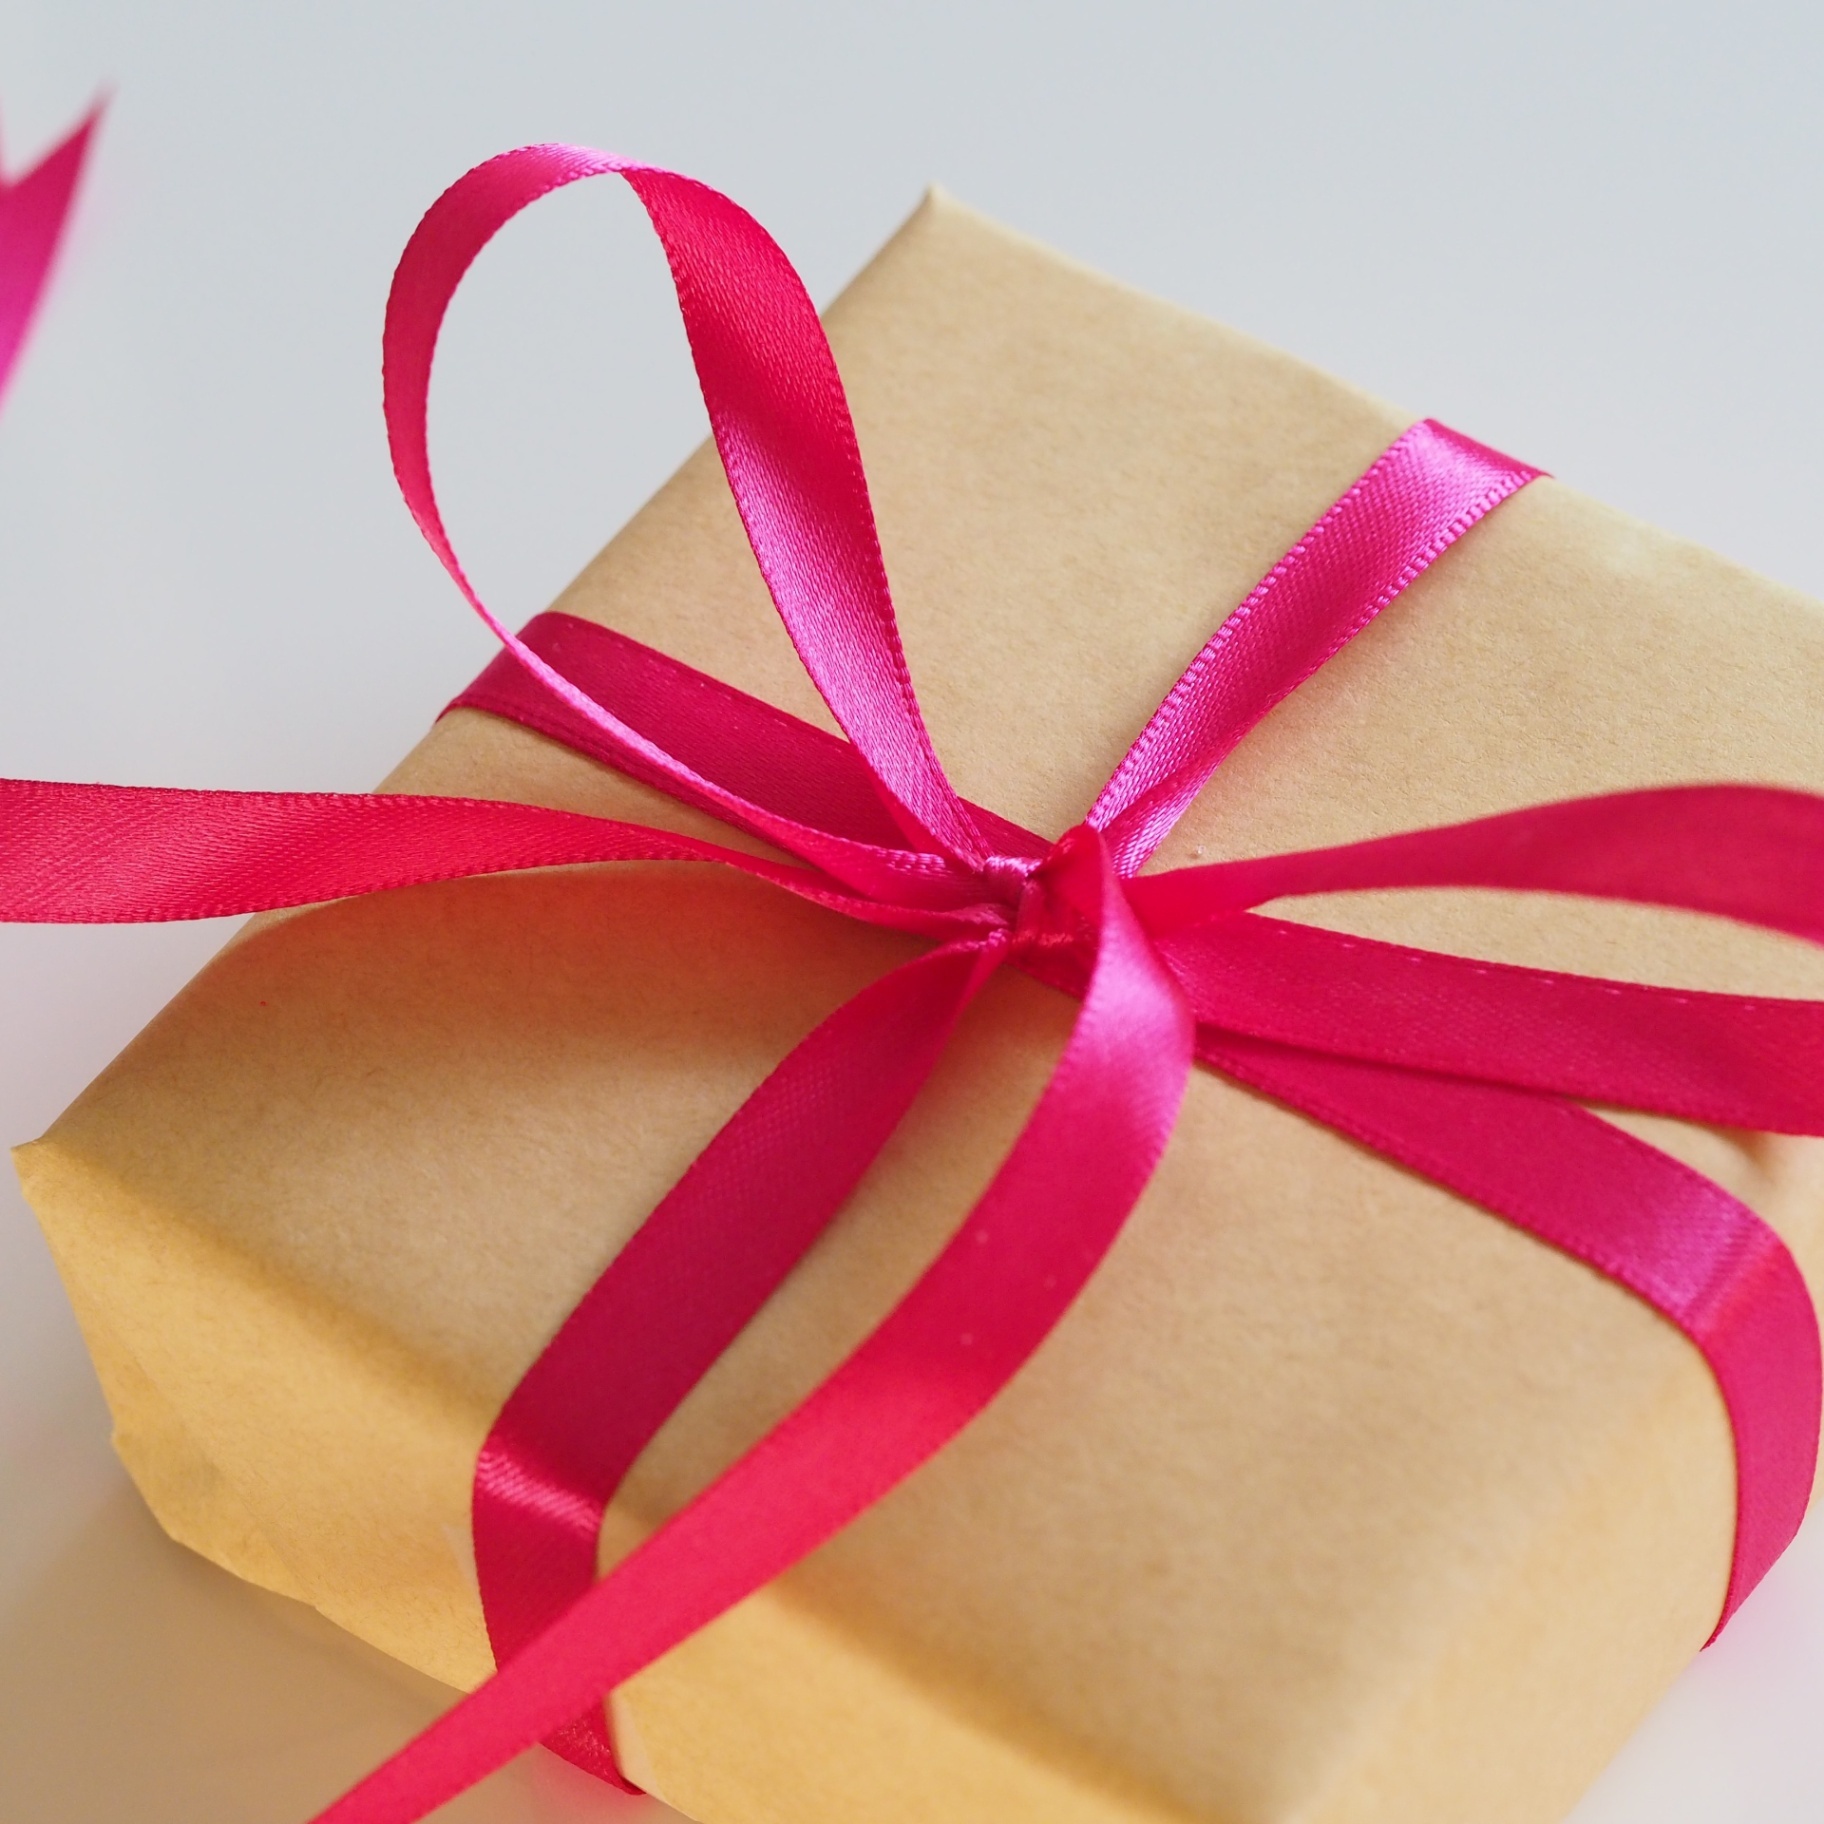 Tips to Consider When Finding the Perfect Gift for Someone Special